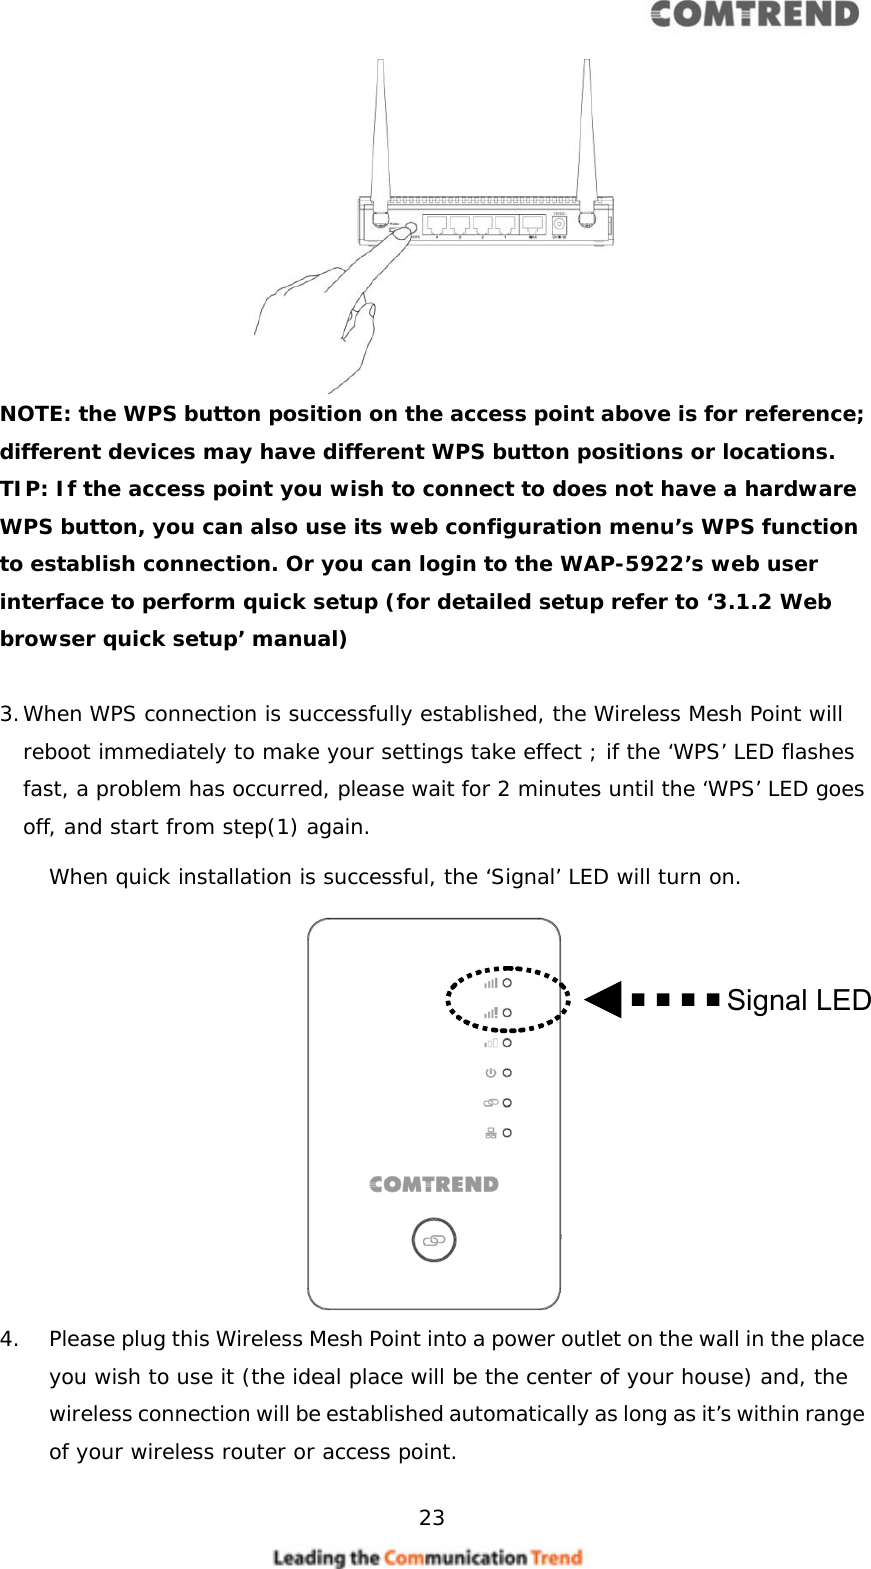     23   NOTE: the WPS button position on the access point above is for reference; different devices may have different WPS button positions or locations. TIP: If the access point you wish to connect to does not have a hardware WPS button, you can also use its web configuration menu’s WPS function to establish connection. Or you can login to the WAP-5922’s web user interface to perform quick setup (for detailed setup refer to ‘3.1.2 Web browser quick setup’ manual)  3. When WPS connection is successfully established, the Wireless Mesh Point will reboot immediately to make your settings take effect ; if the ‘WPS’ LED flashes fast, a problem has occurred, please wait for 2 minutes until the ‘WPS’ LED goes off, and start from step(1) again. When quick installation is successful, the ‘Signal’ LED will turn on.  4. Please plug this Wireless Mesh Point into a power outlet on the wall in the place you wish to use it (the ideal place will be the center of your house) and, the wireless connection will be established automatically as long as it’s within range of your wireless router or access point. Signal LED